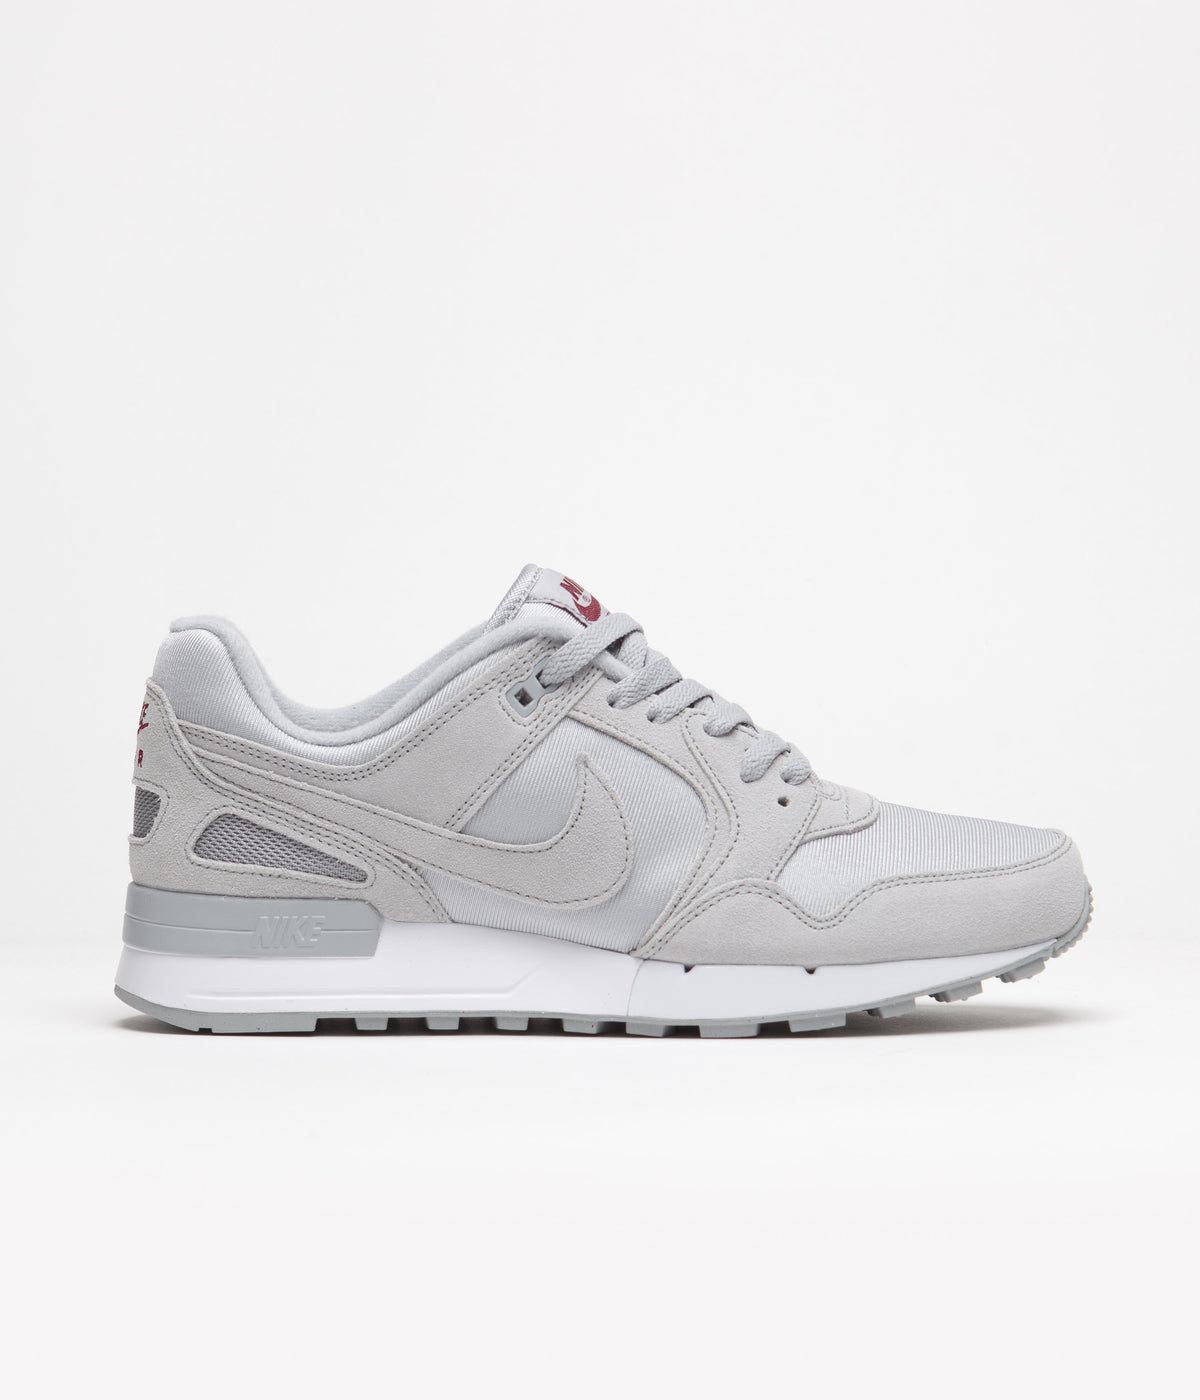 Nike Air Pegasus 89 Shoes - Wolf Grey / Wolf Grey - Team Red - White |  Always in Colour